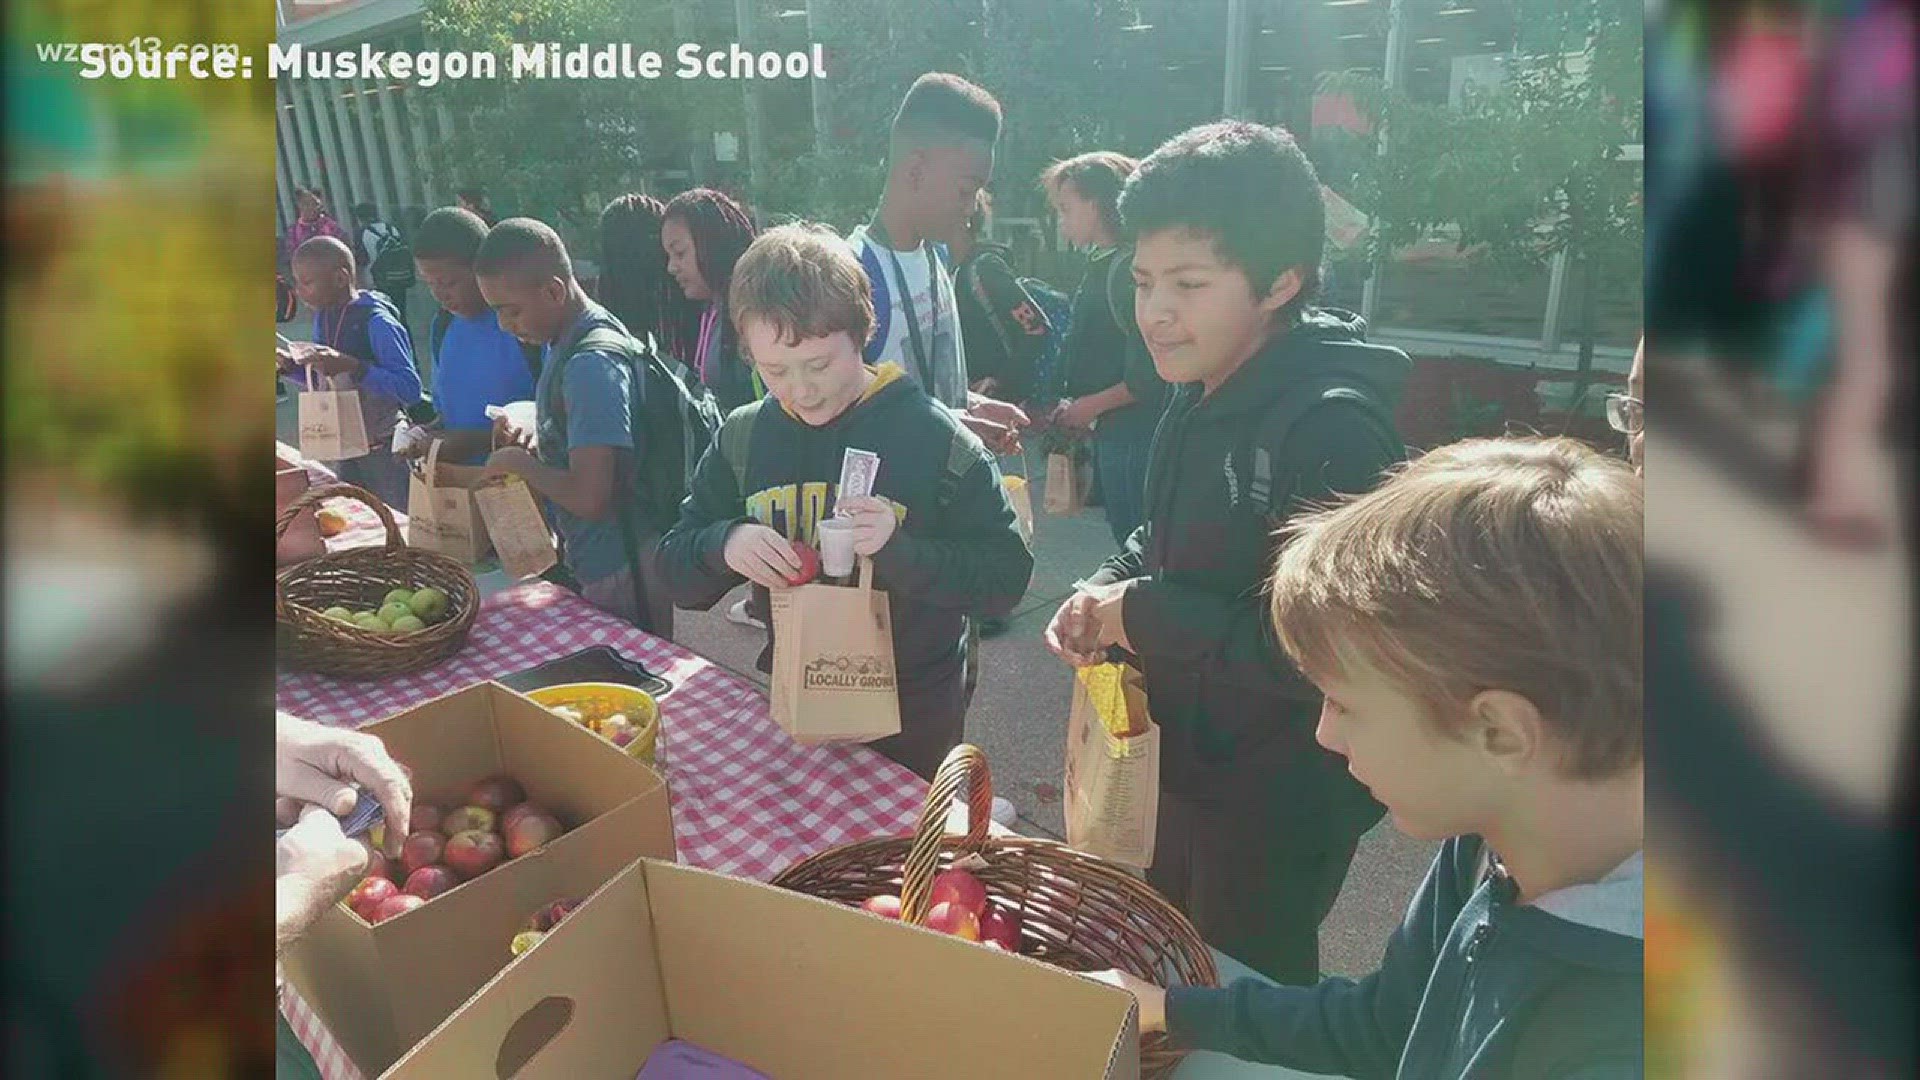 Muskegon Middle School hosts farmer's market for students